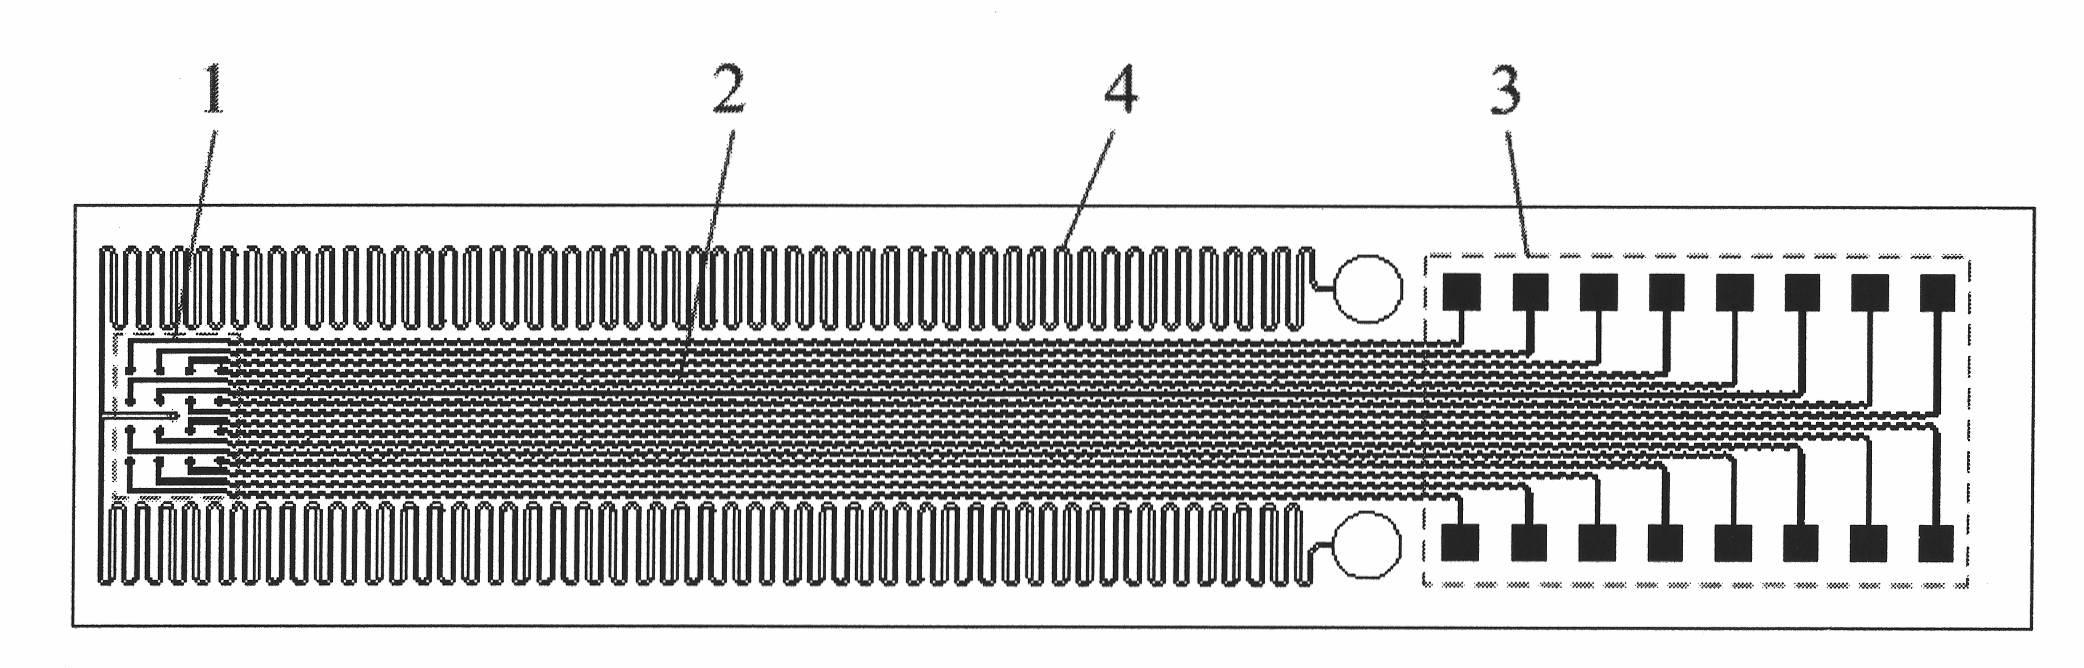 PDMS-based flexible implanted neural microelectrode and manufacturing method